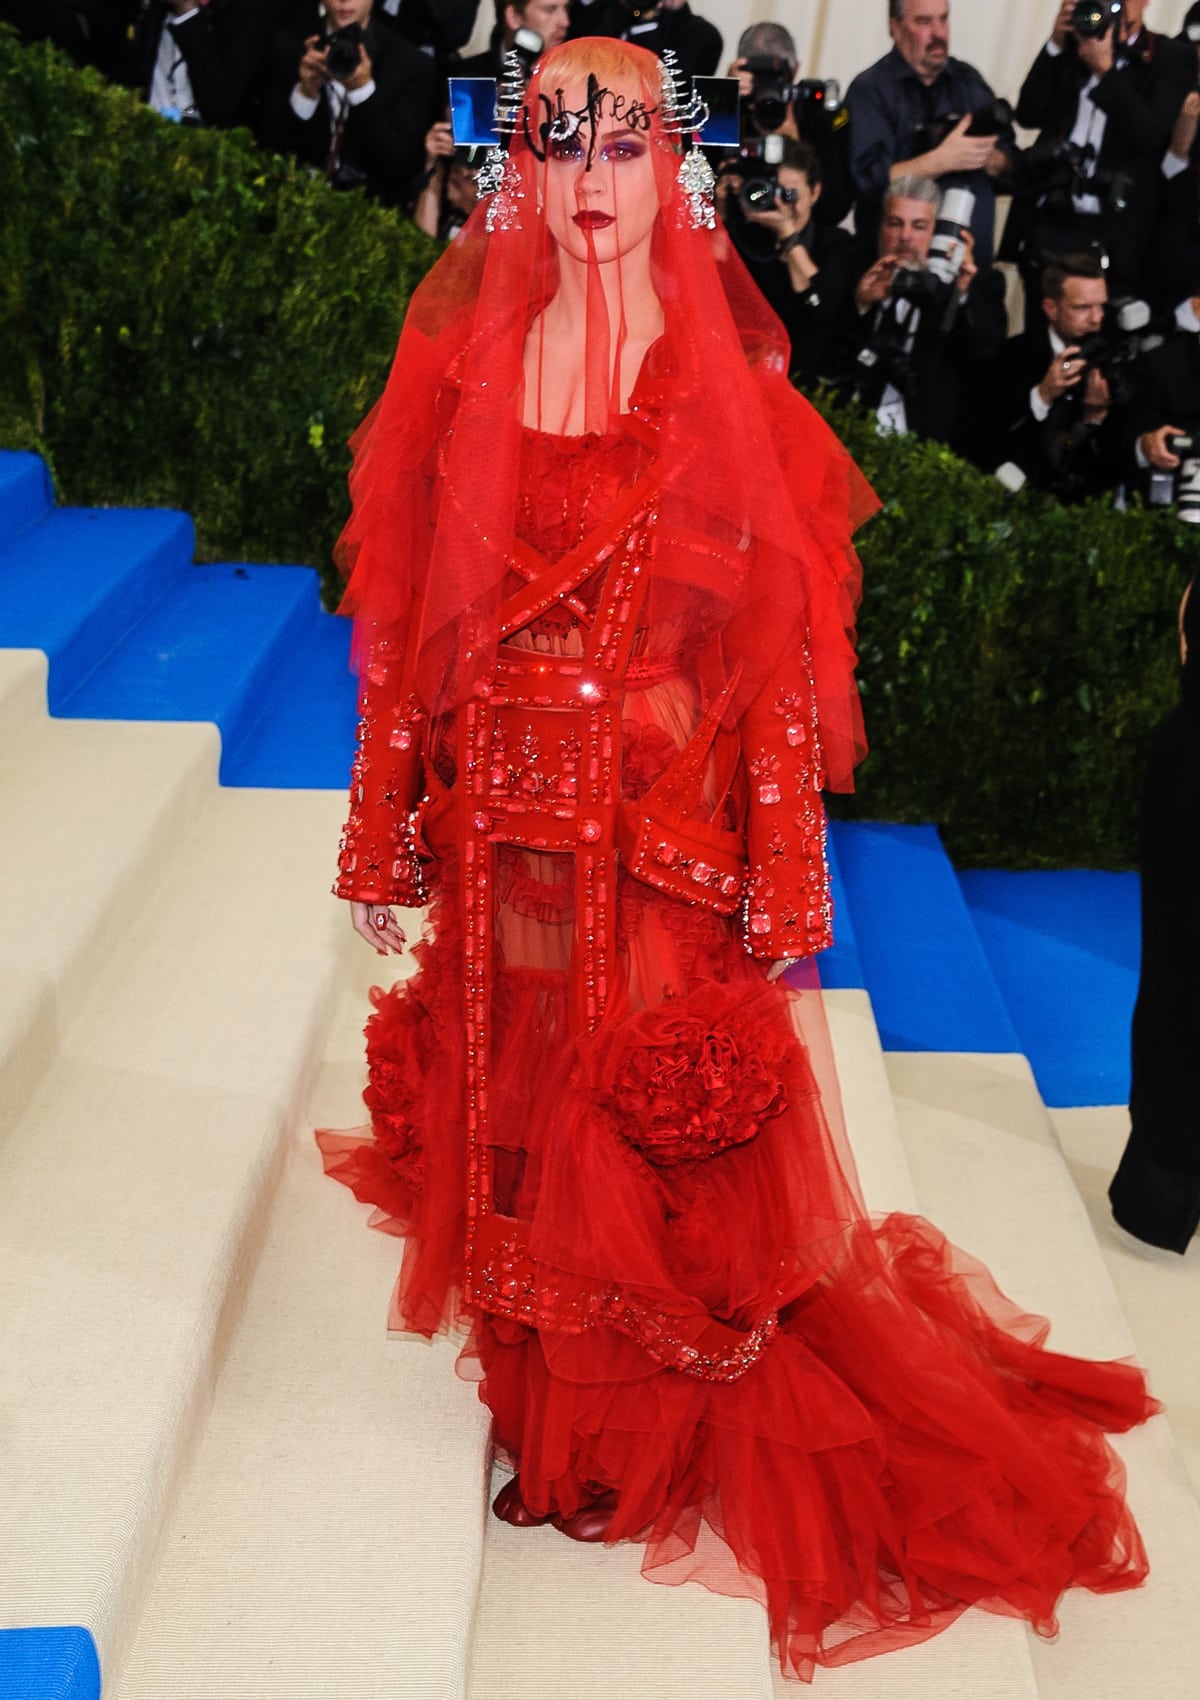 Katy Perry in a red Maison Margiela Spring 2017 Couture design attends the 'Rei Kawakubo / Comme des Garcons: Art Of The In-Between' Costume Institute Gala 2017